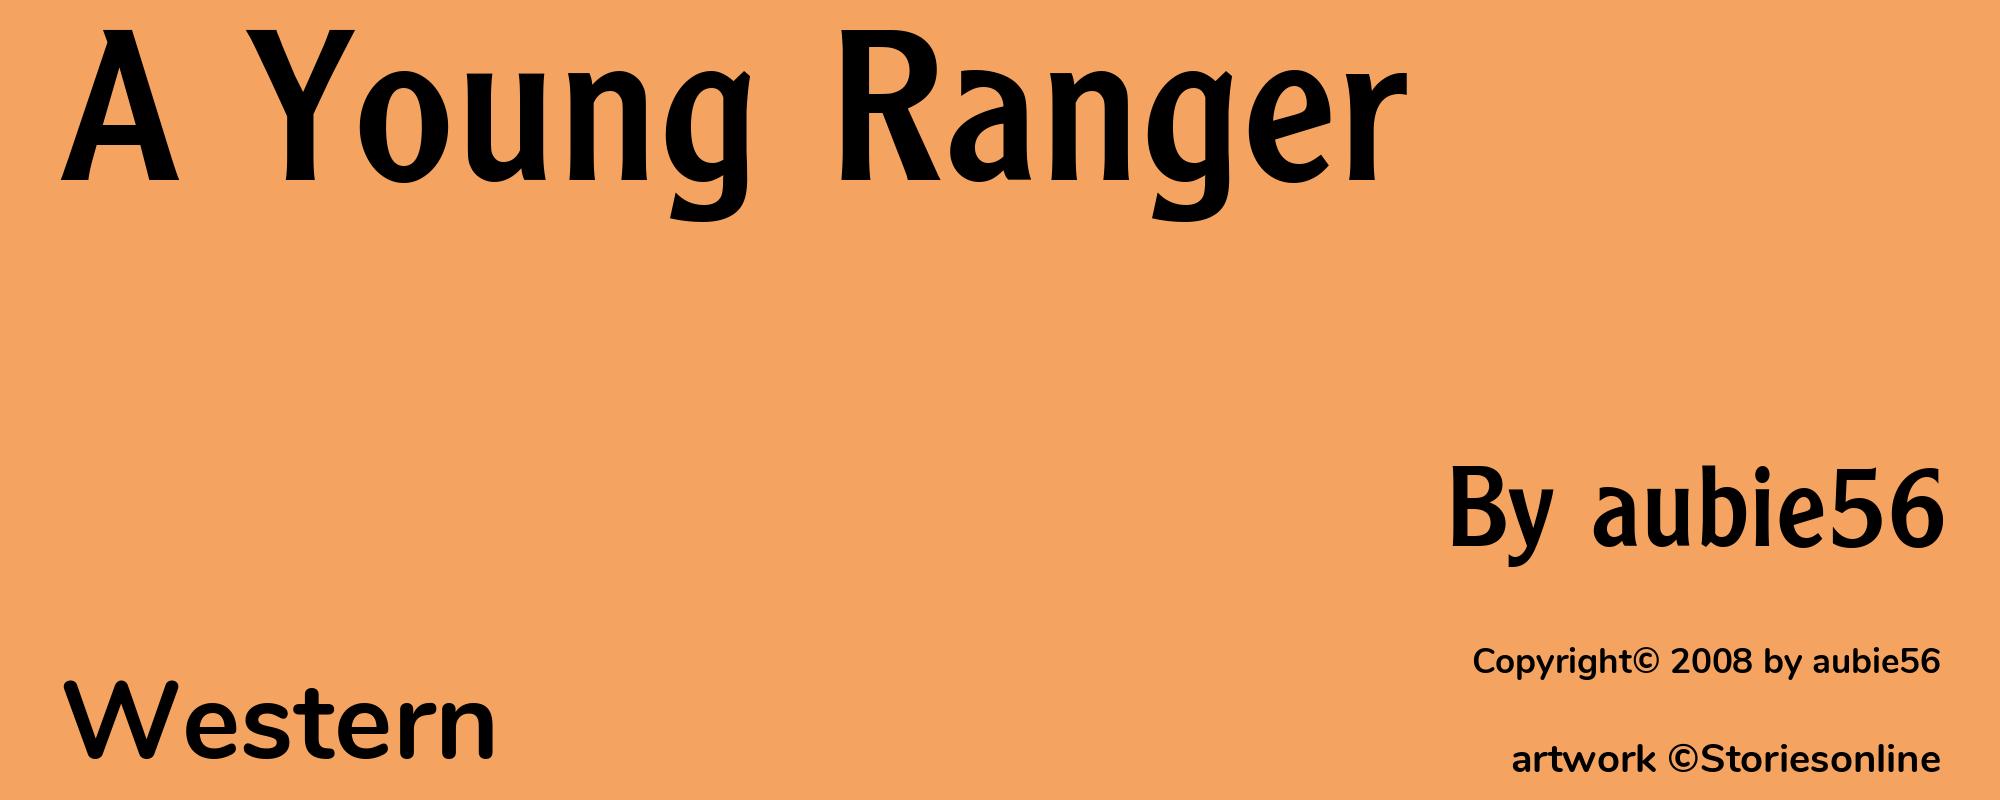 A Young Ranger - Cover